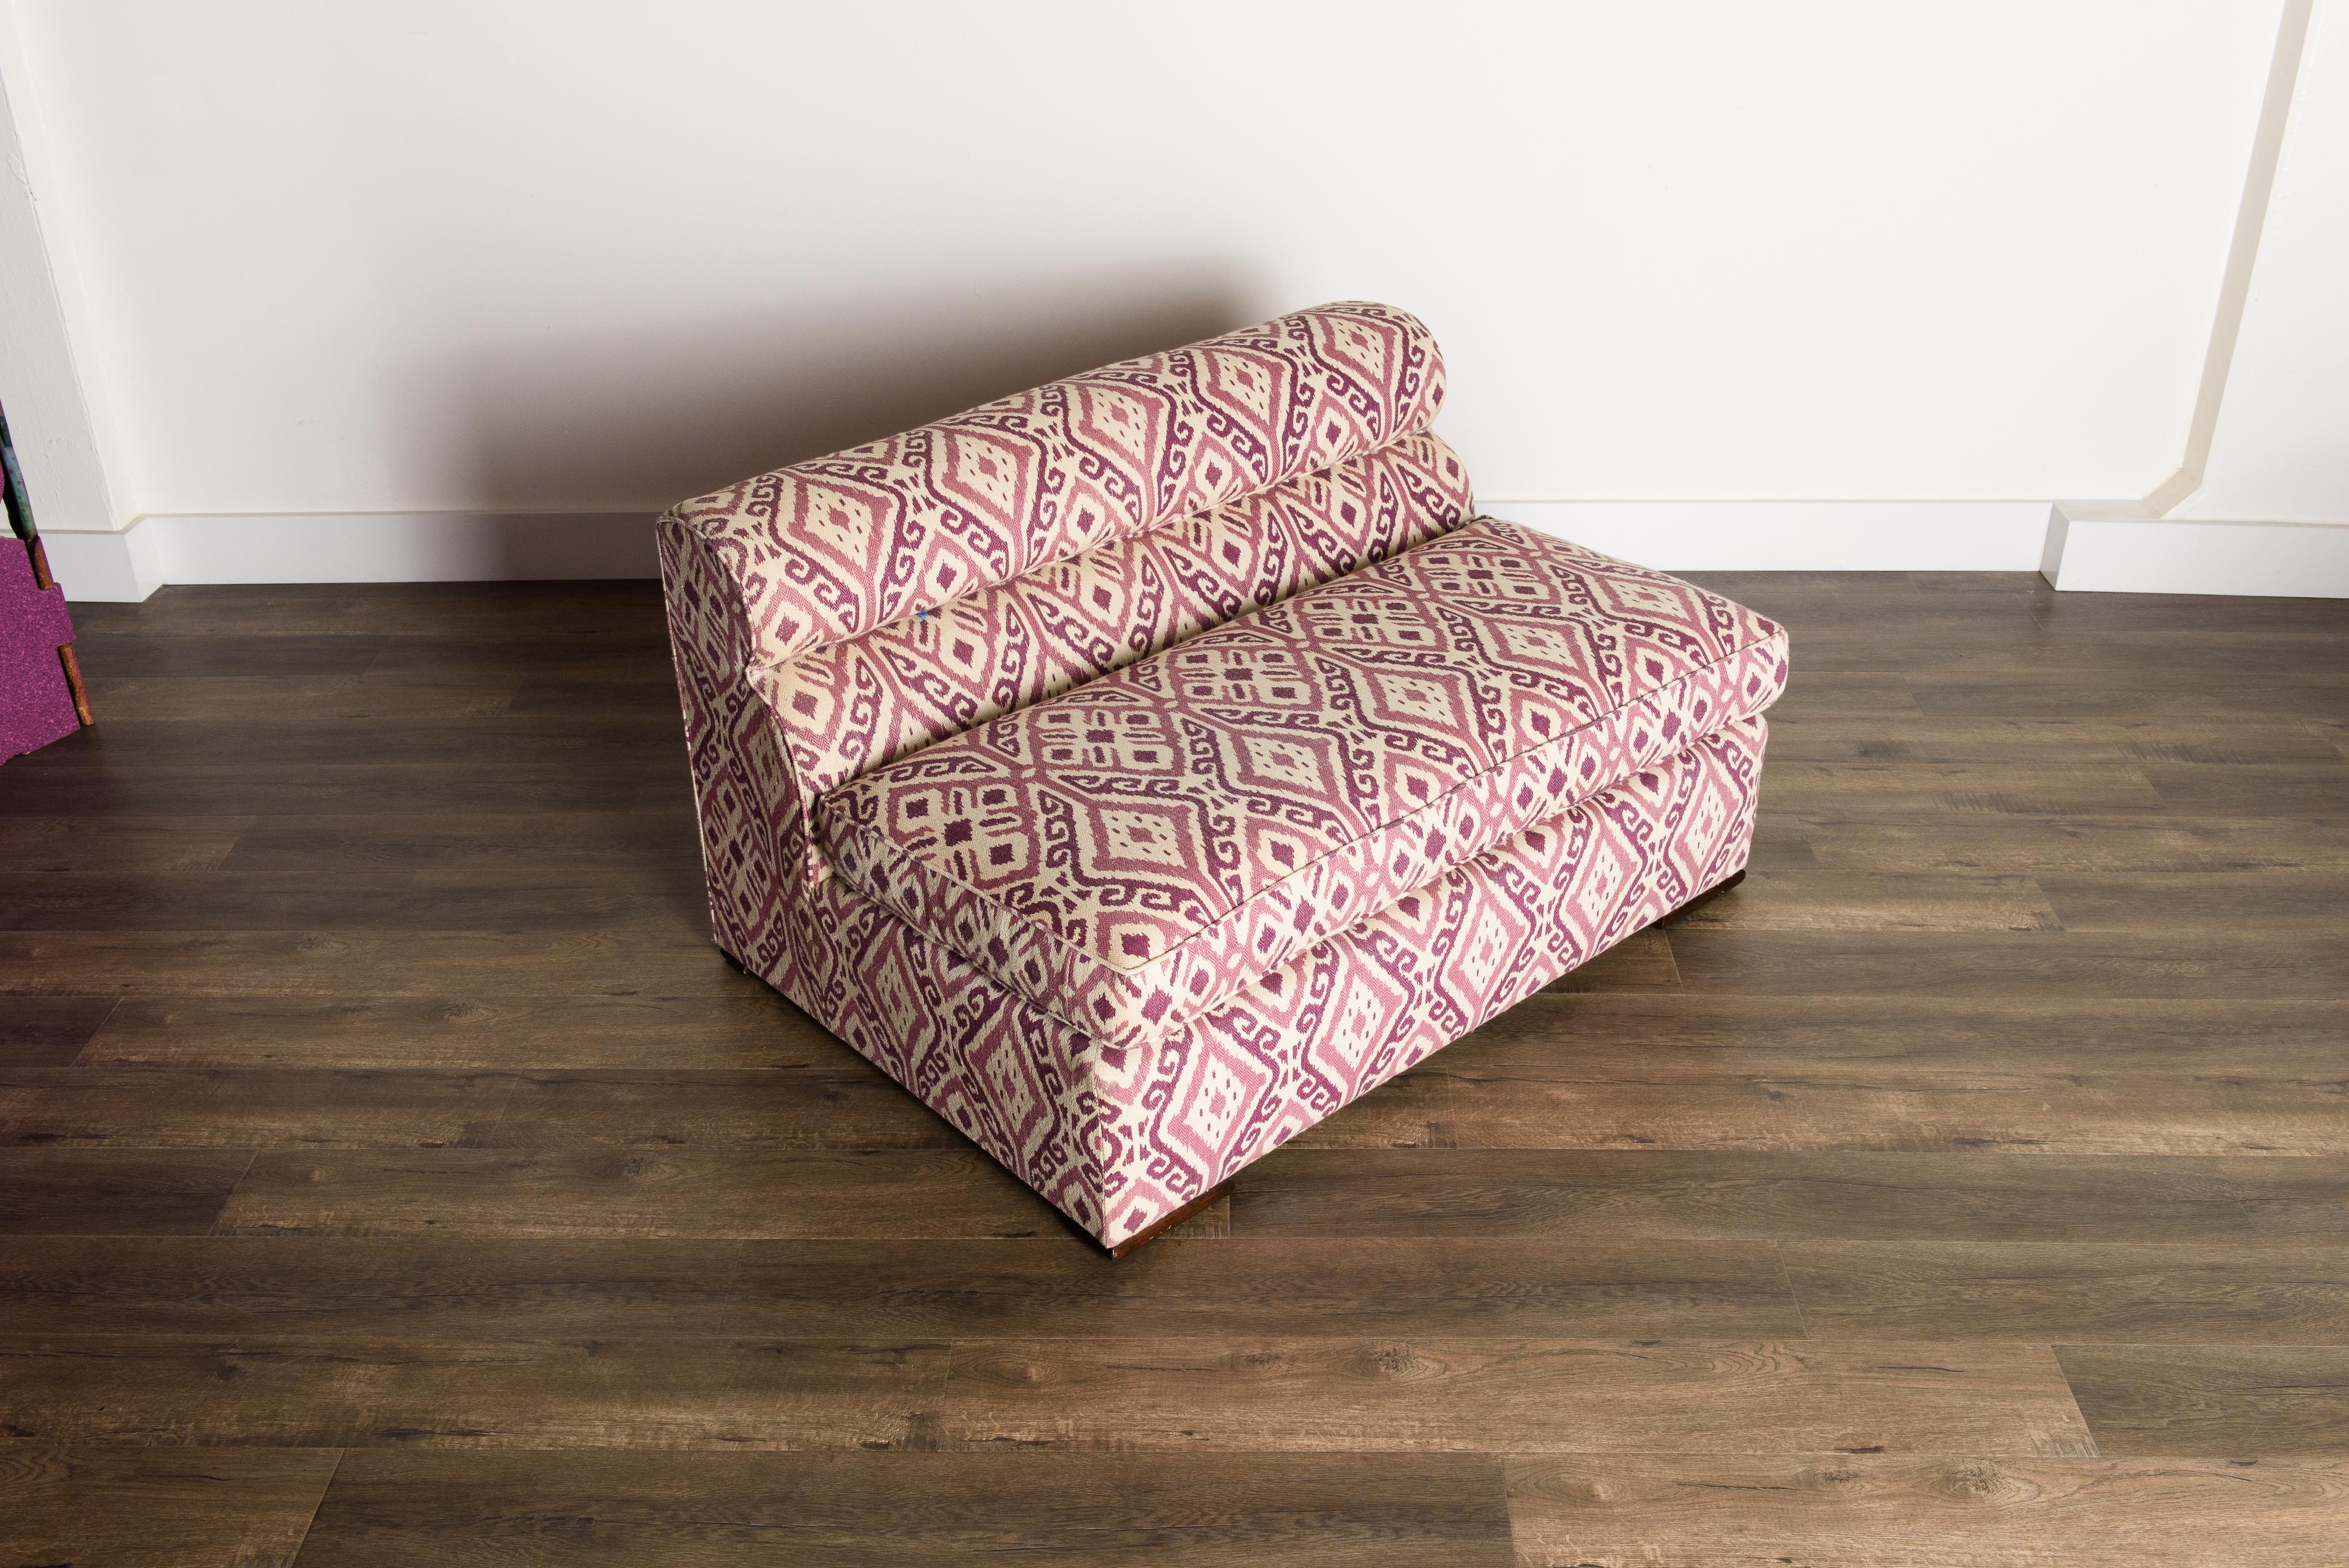 Paul Laszlo Attributed Curved Sectional Sofa Reupholstered in Pink Ikat Fabric For Sale 3